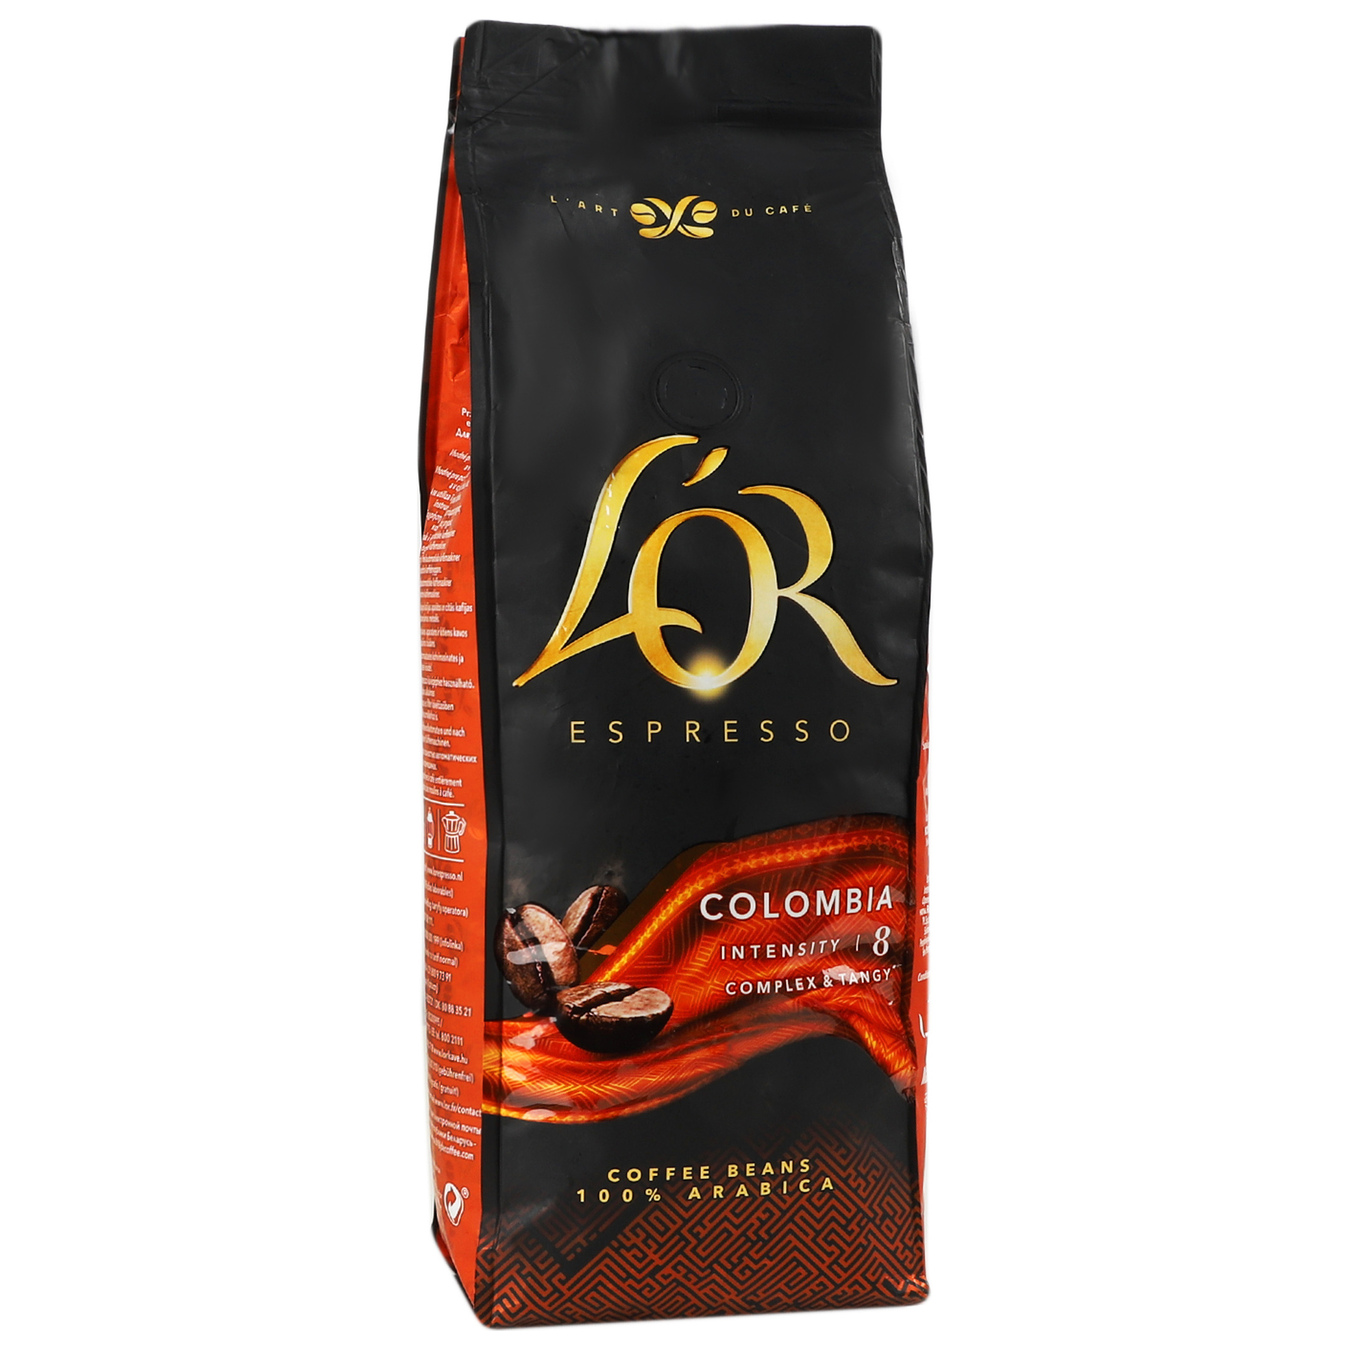 L'or Espresso Colombia Coffee Beans 500g 3